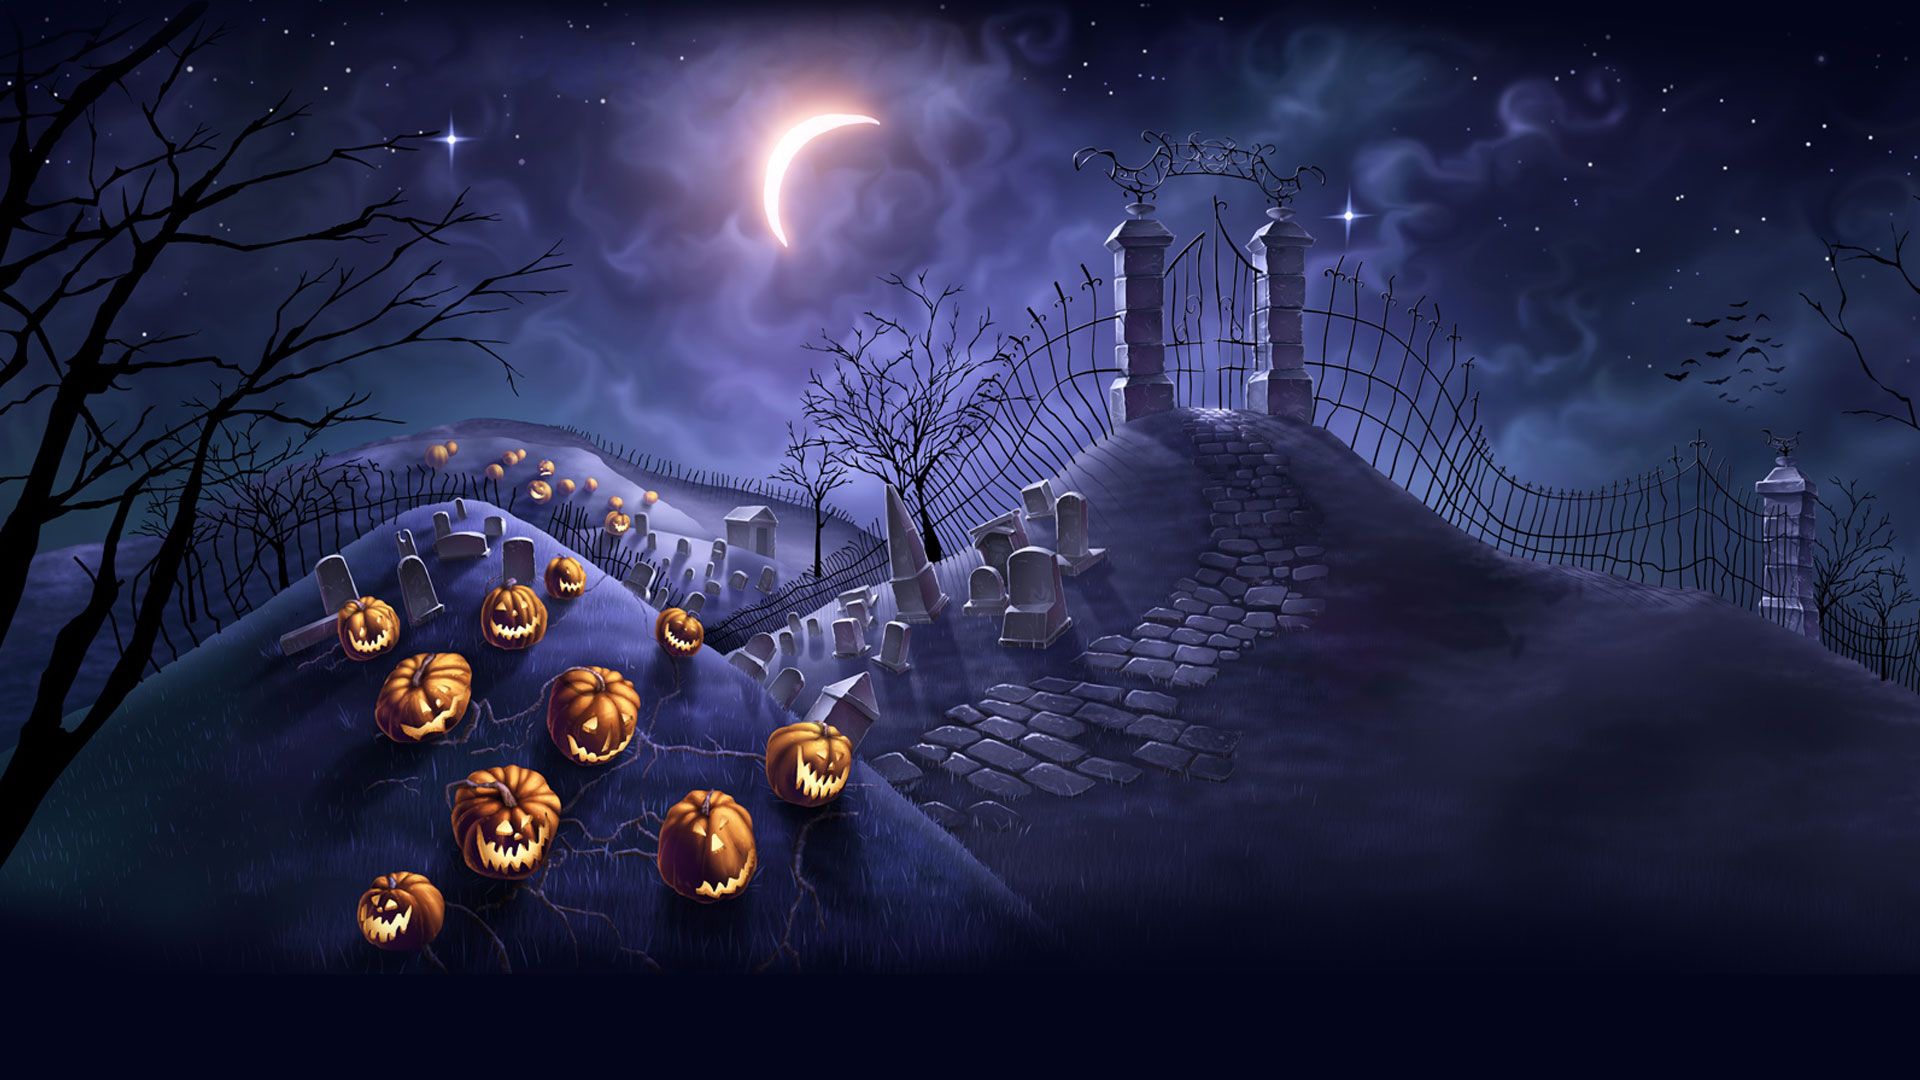 Free download 50 Scary Halloween 2019 Wallpaper HD Background Pumpkins [1920x1080] for your Desktop, Mobile & Tablet. Explore Purple Halloween Wallpaper. Purple Halloween Wallpaper, Halloween Wallpaper, Background Halloween